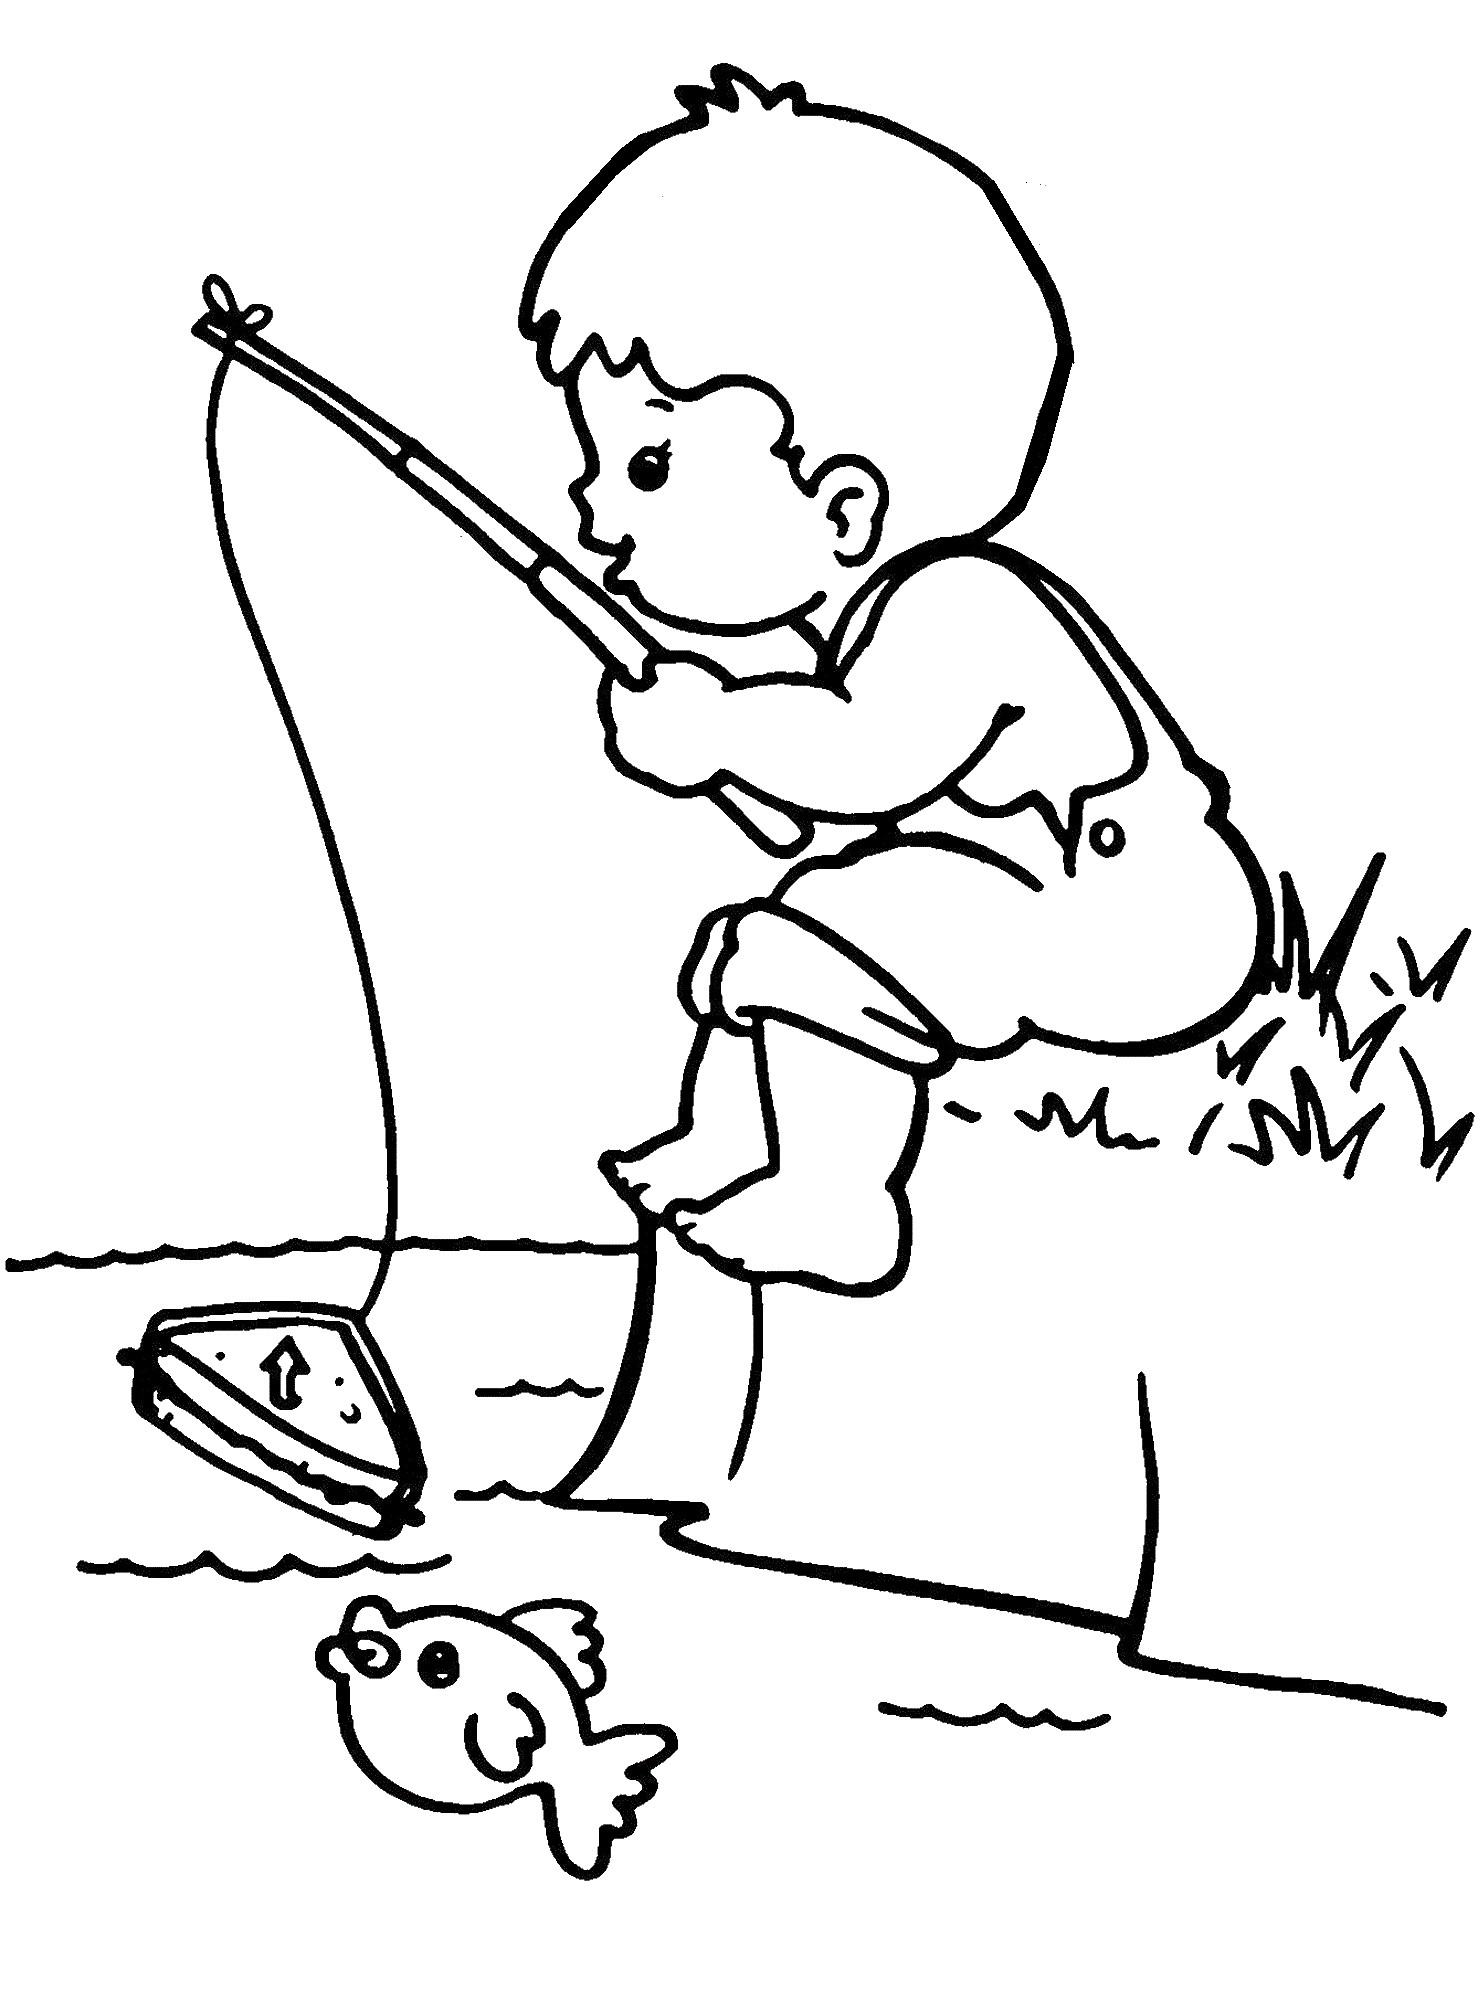 Coloring Sheet For Boys
 Boy Fishing Coloring Page Coloring Home